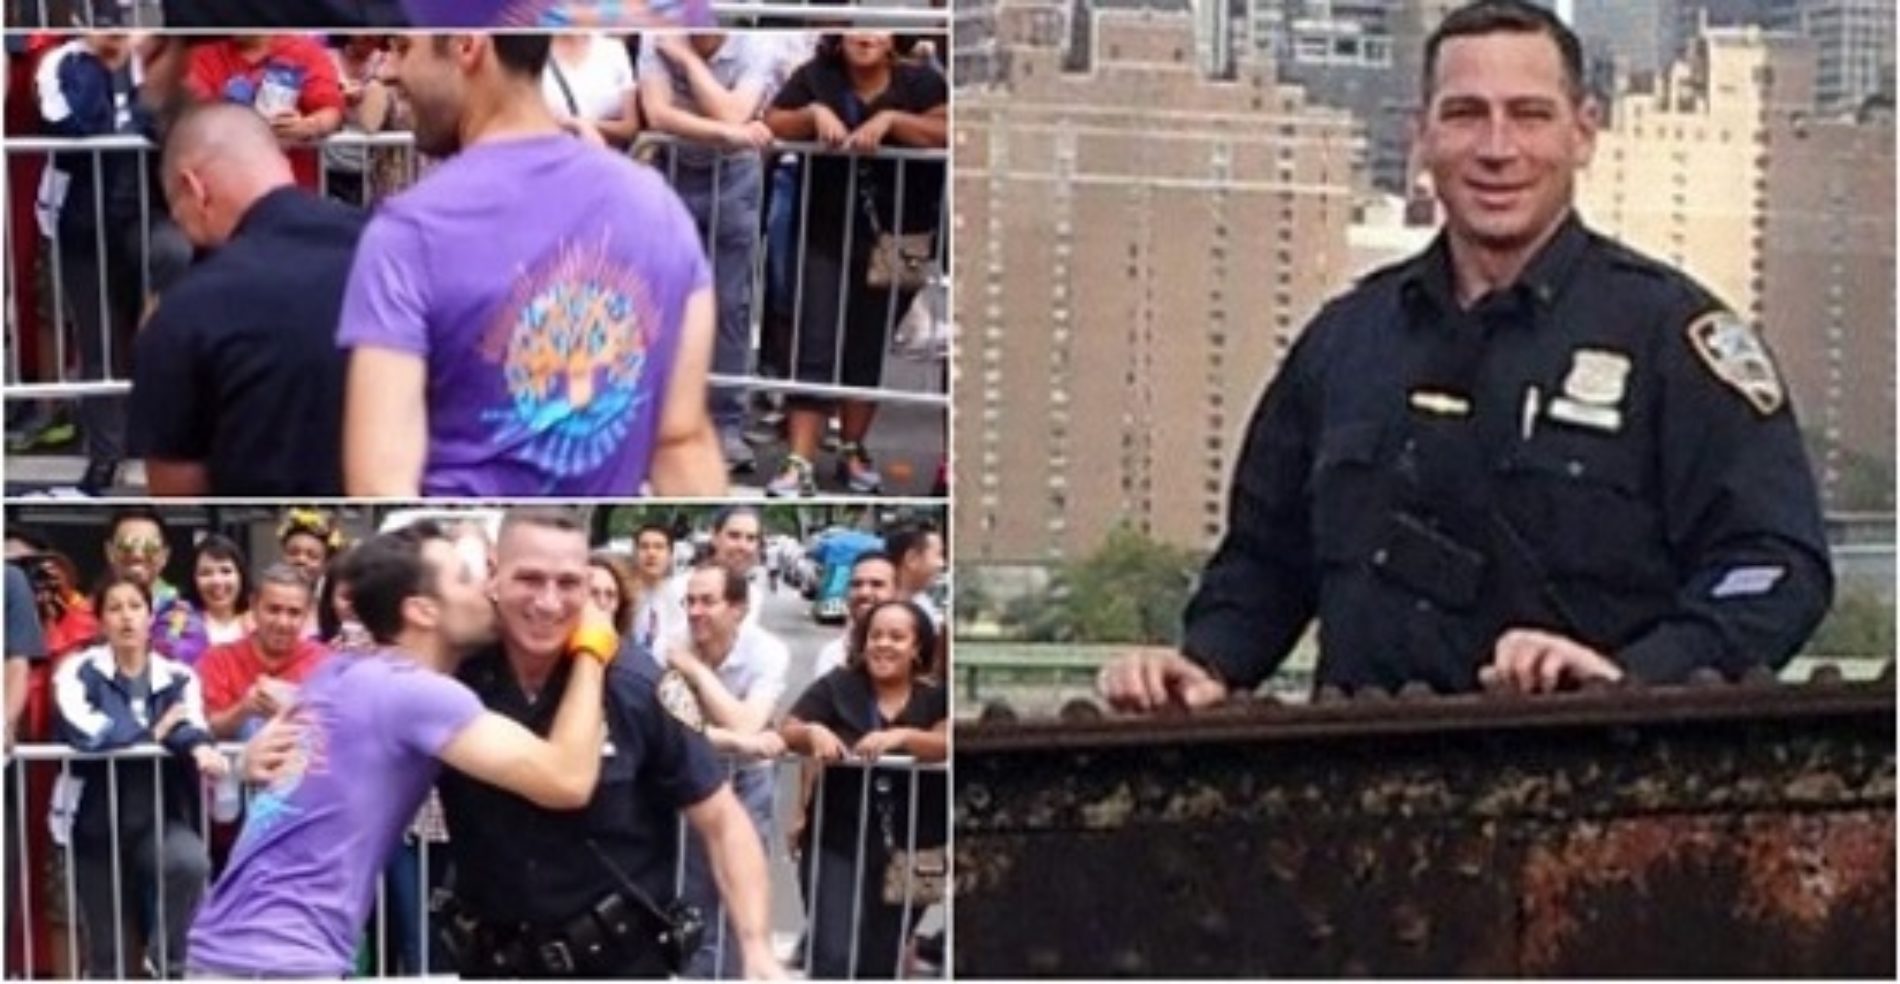 Meet the Hot NYPD Officer Who Got Down And Twerky With Pride Parade Goer